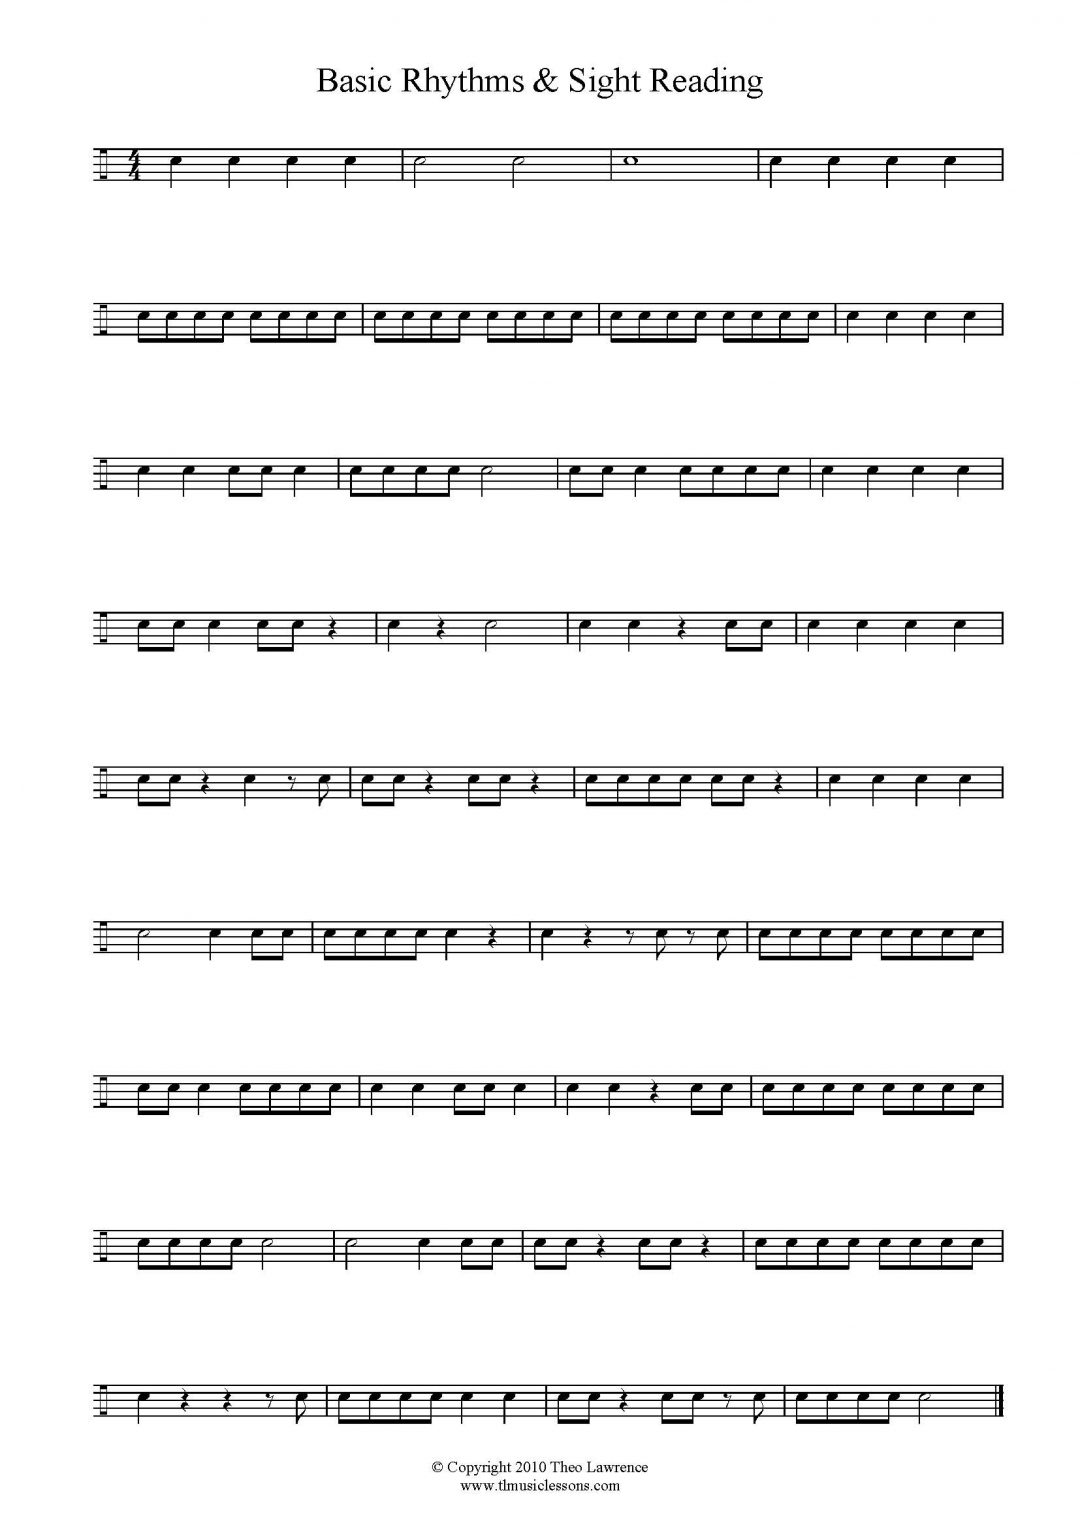 Snare Drum Piece with Basic Rhythms for Grade 1 Sight Reading